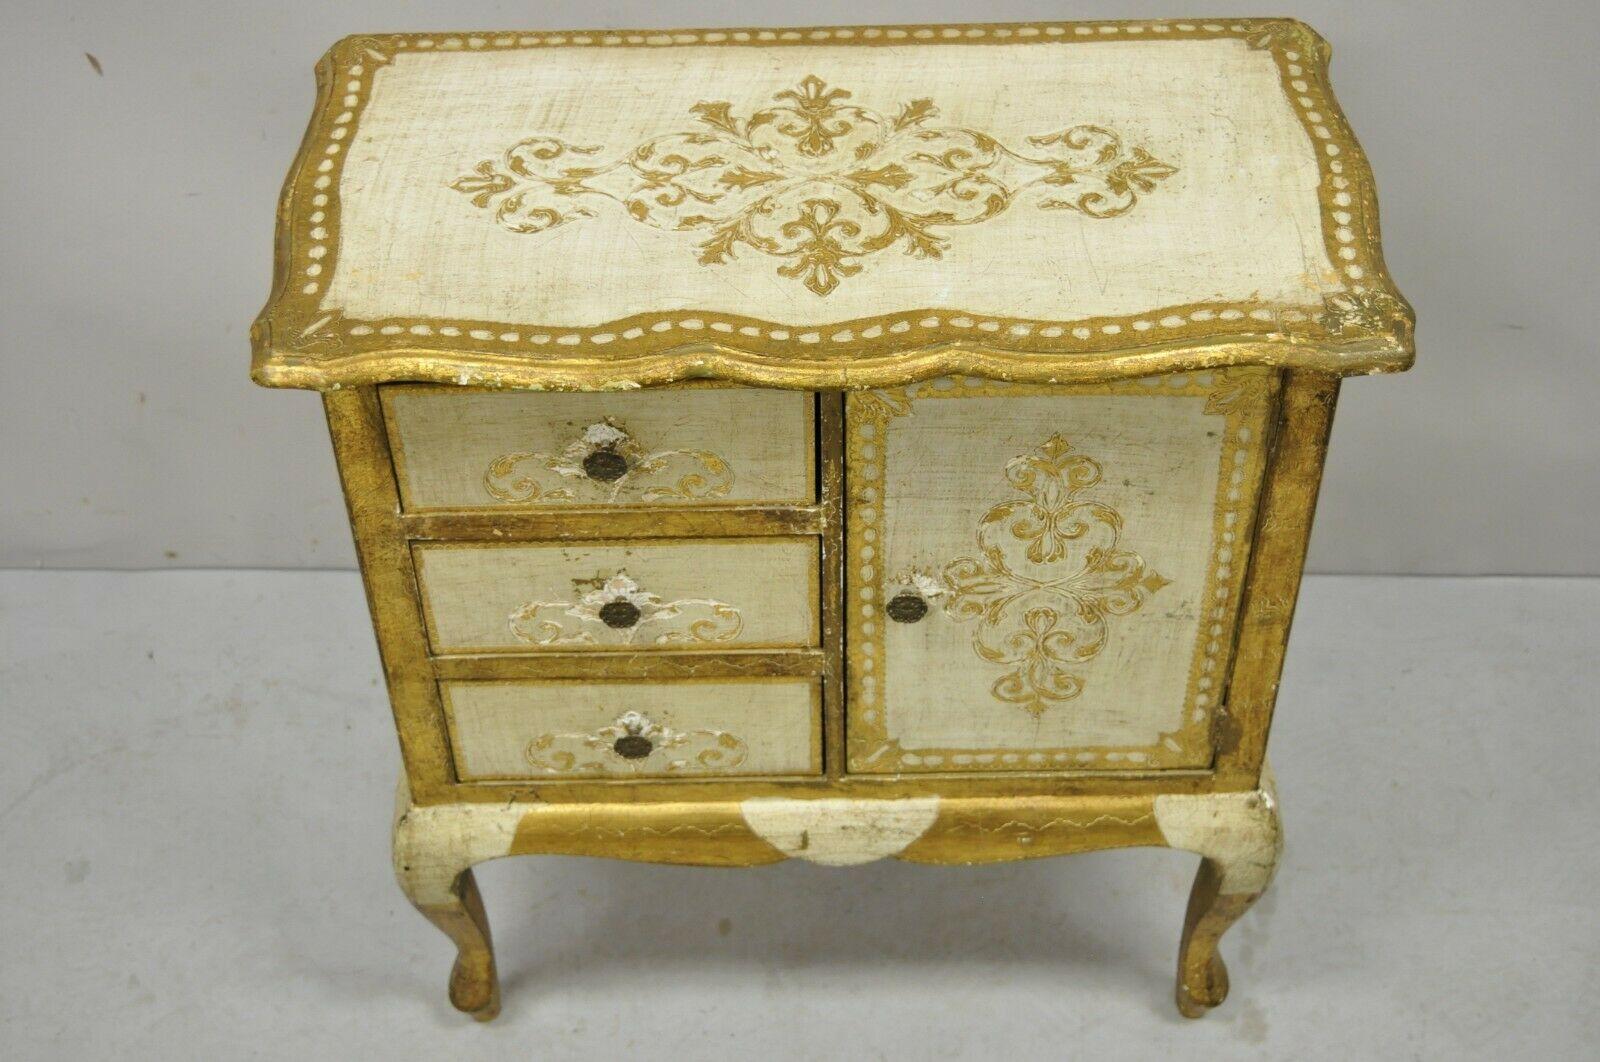 Vintage Italian Florentine Cream and Gold Small Nightstand Side Table Cabinet 4